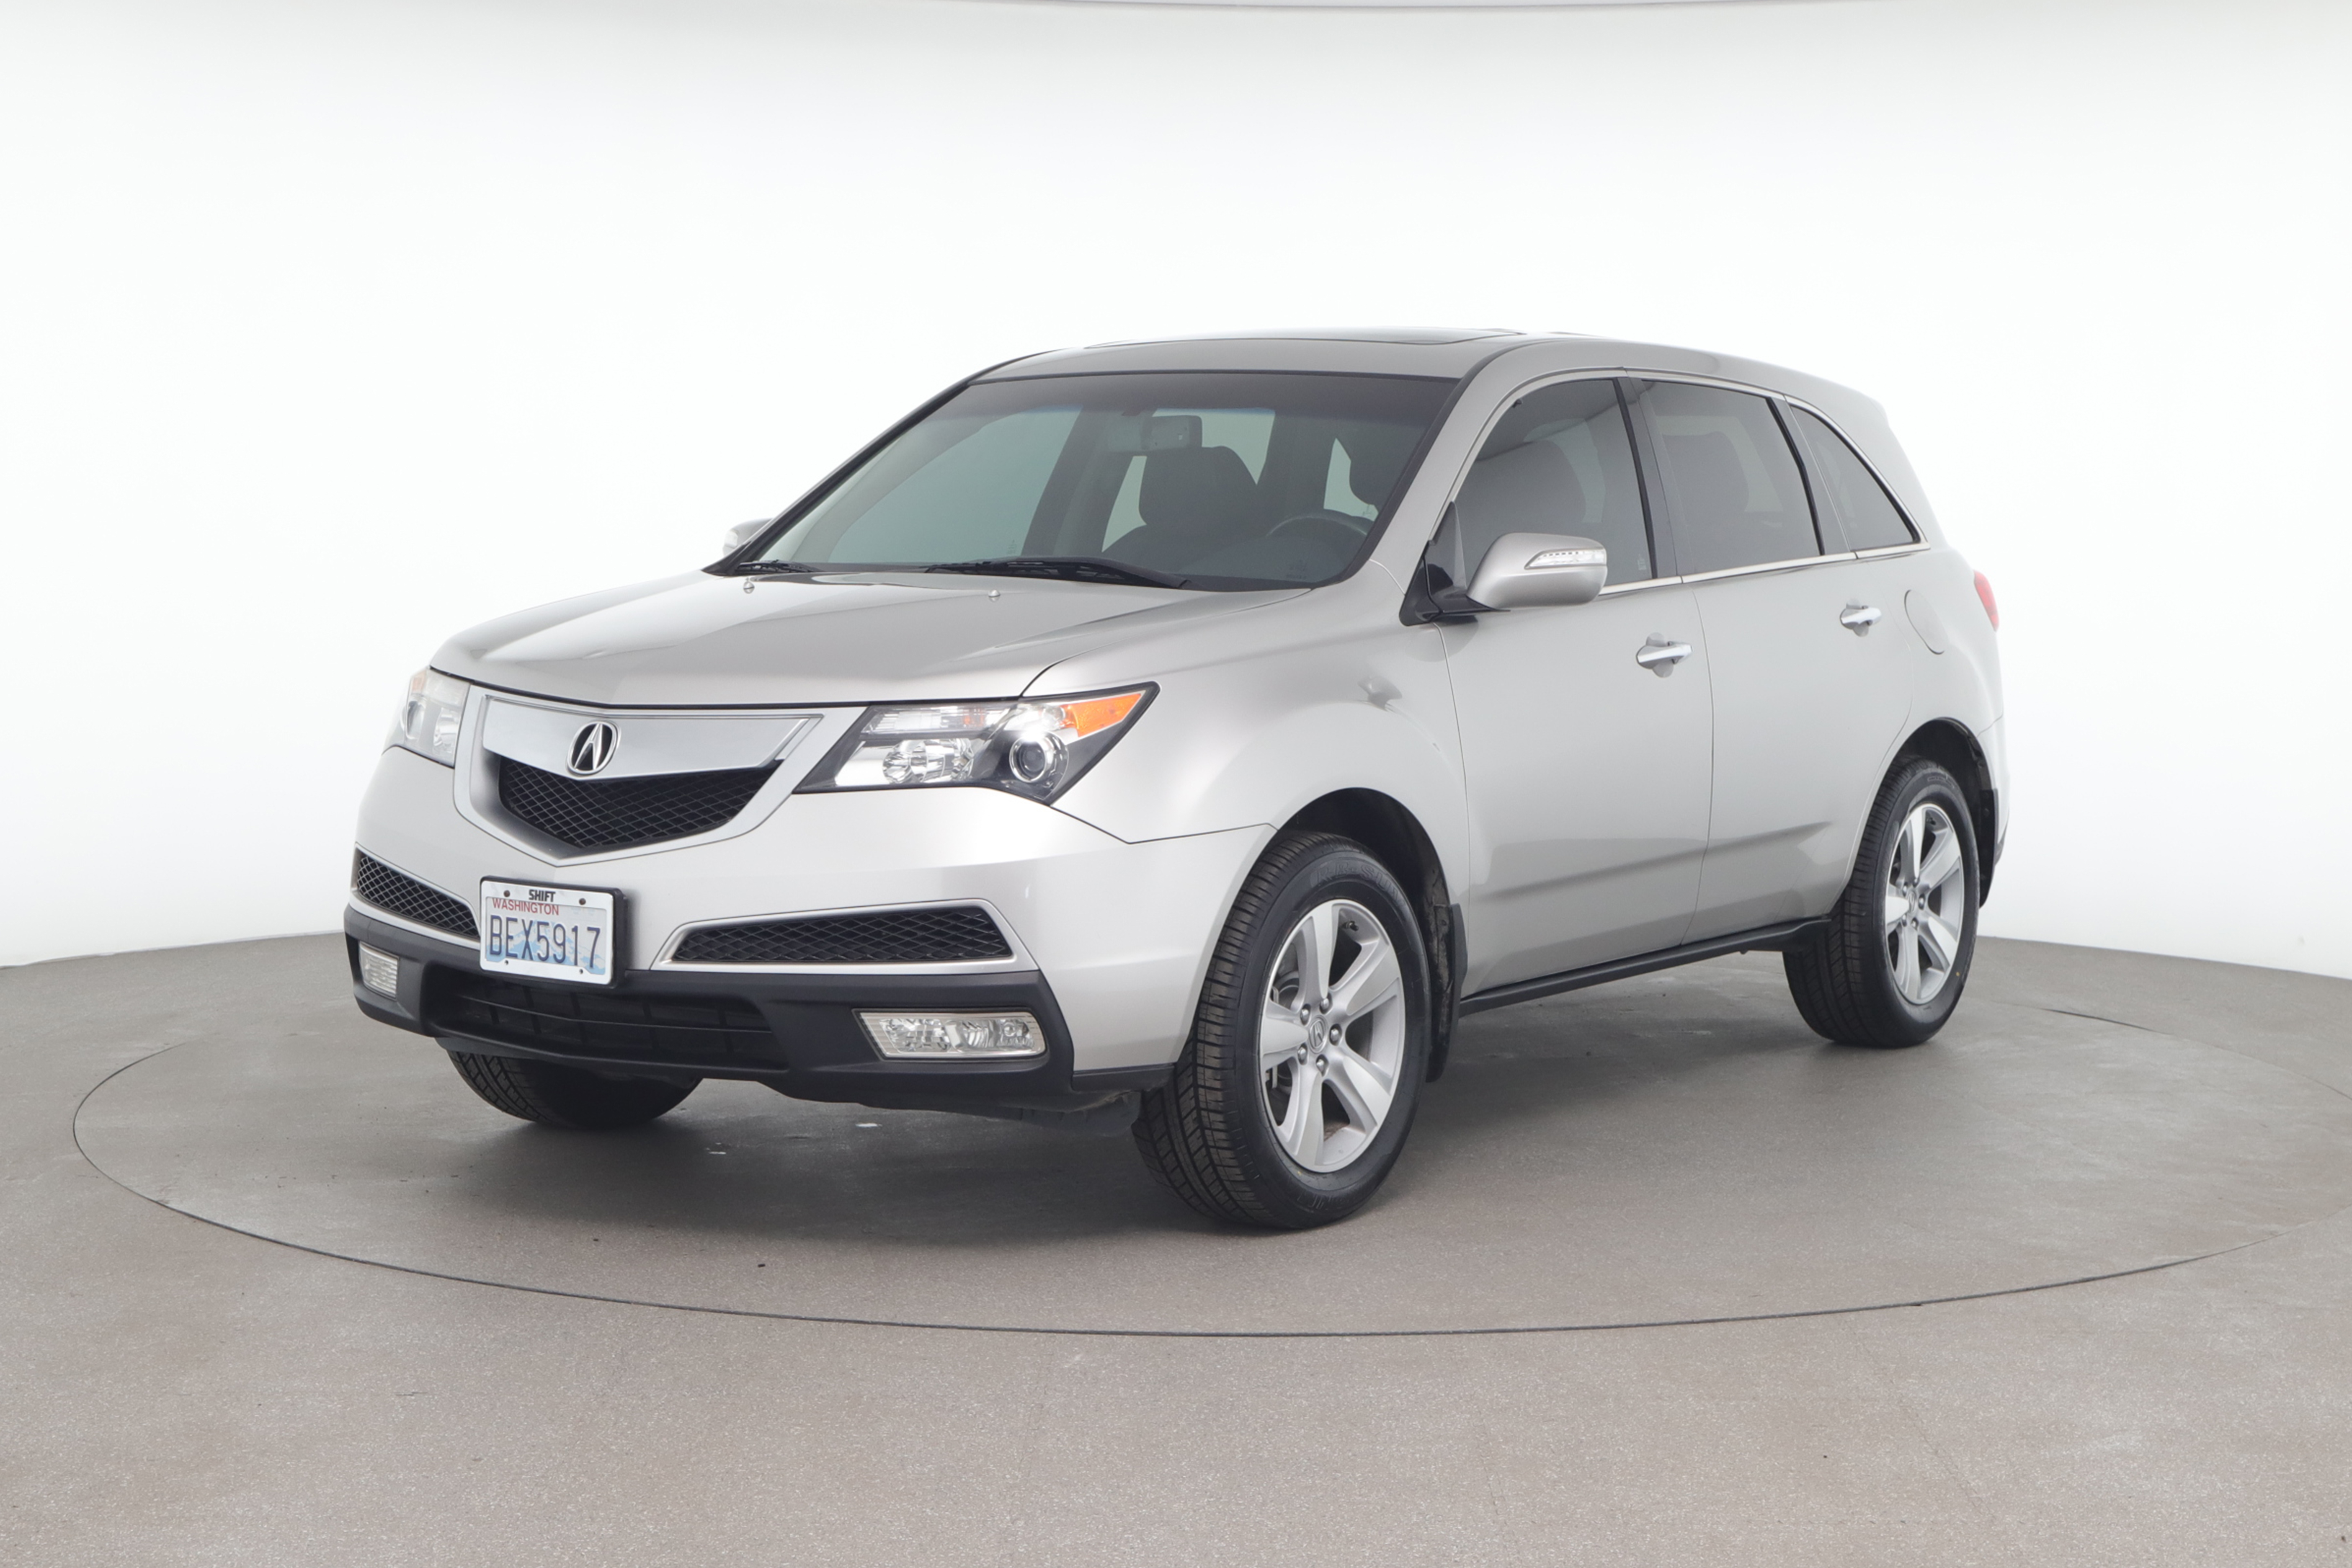 Used 2010 Silver Acura MDX for $14,250